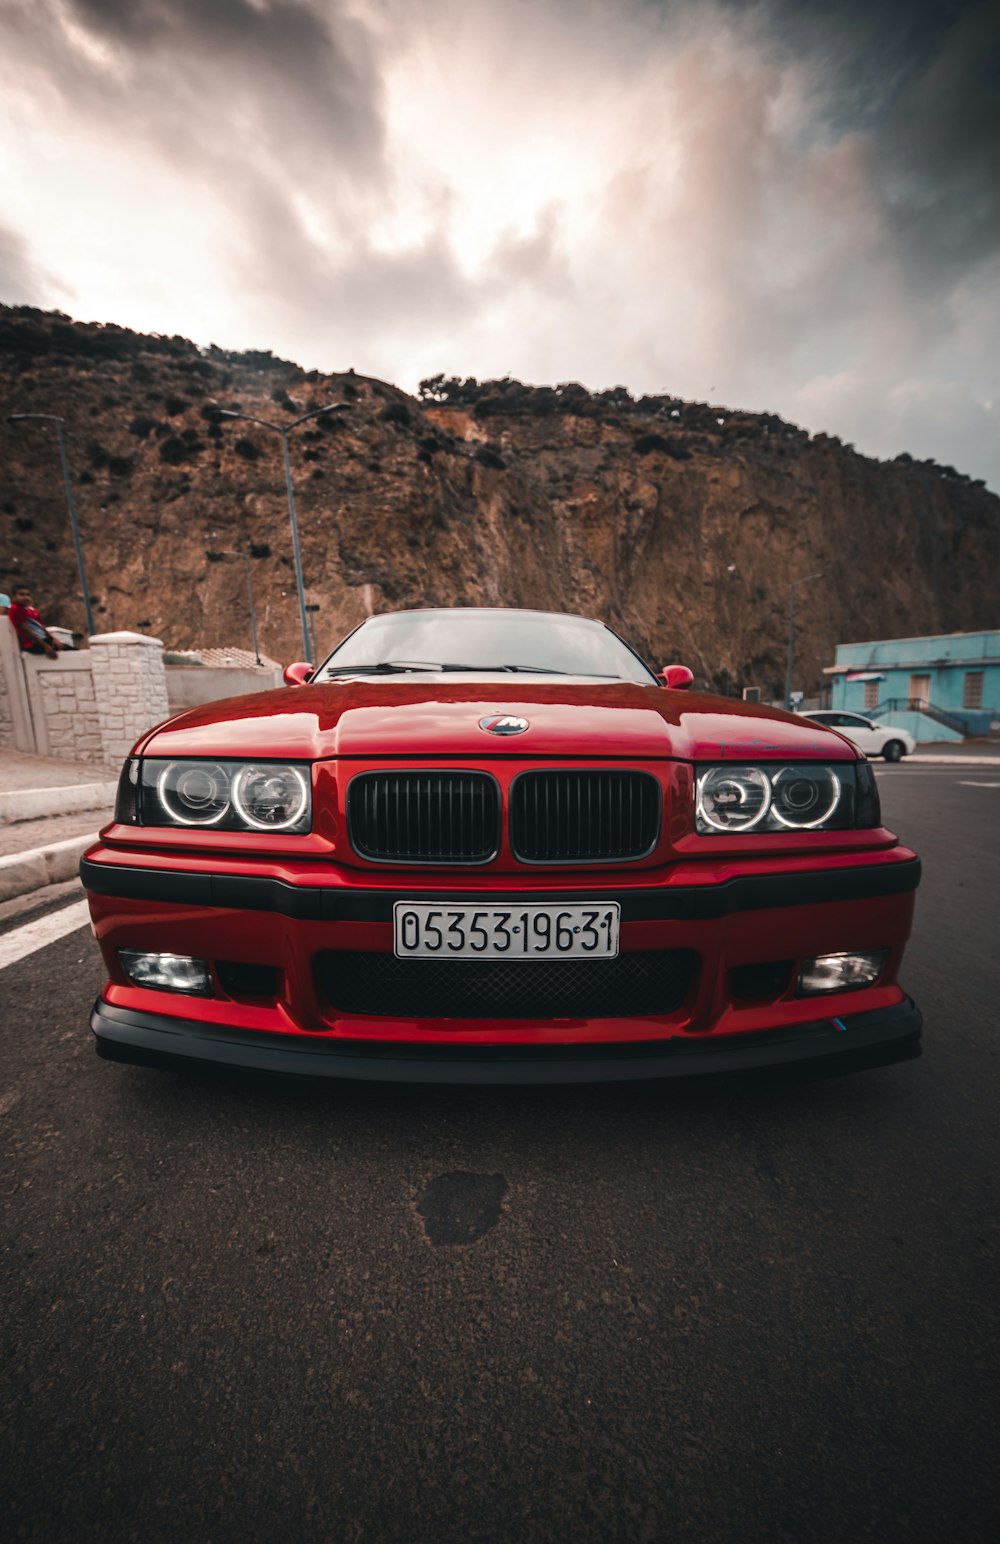 red bmw car on road during daytime